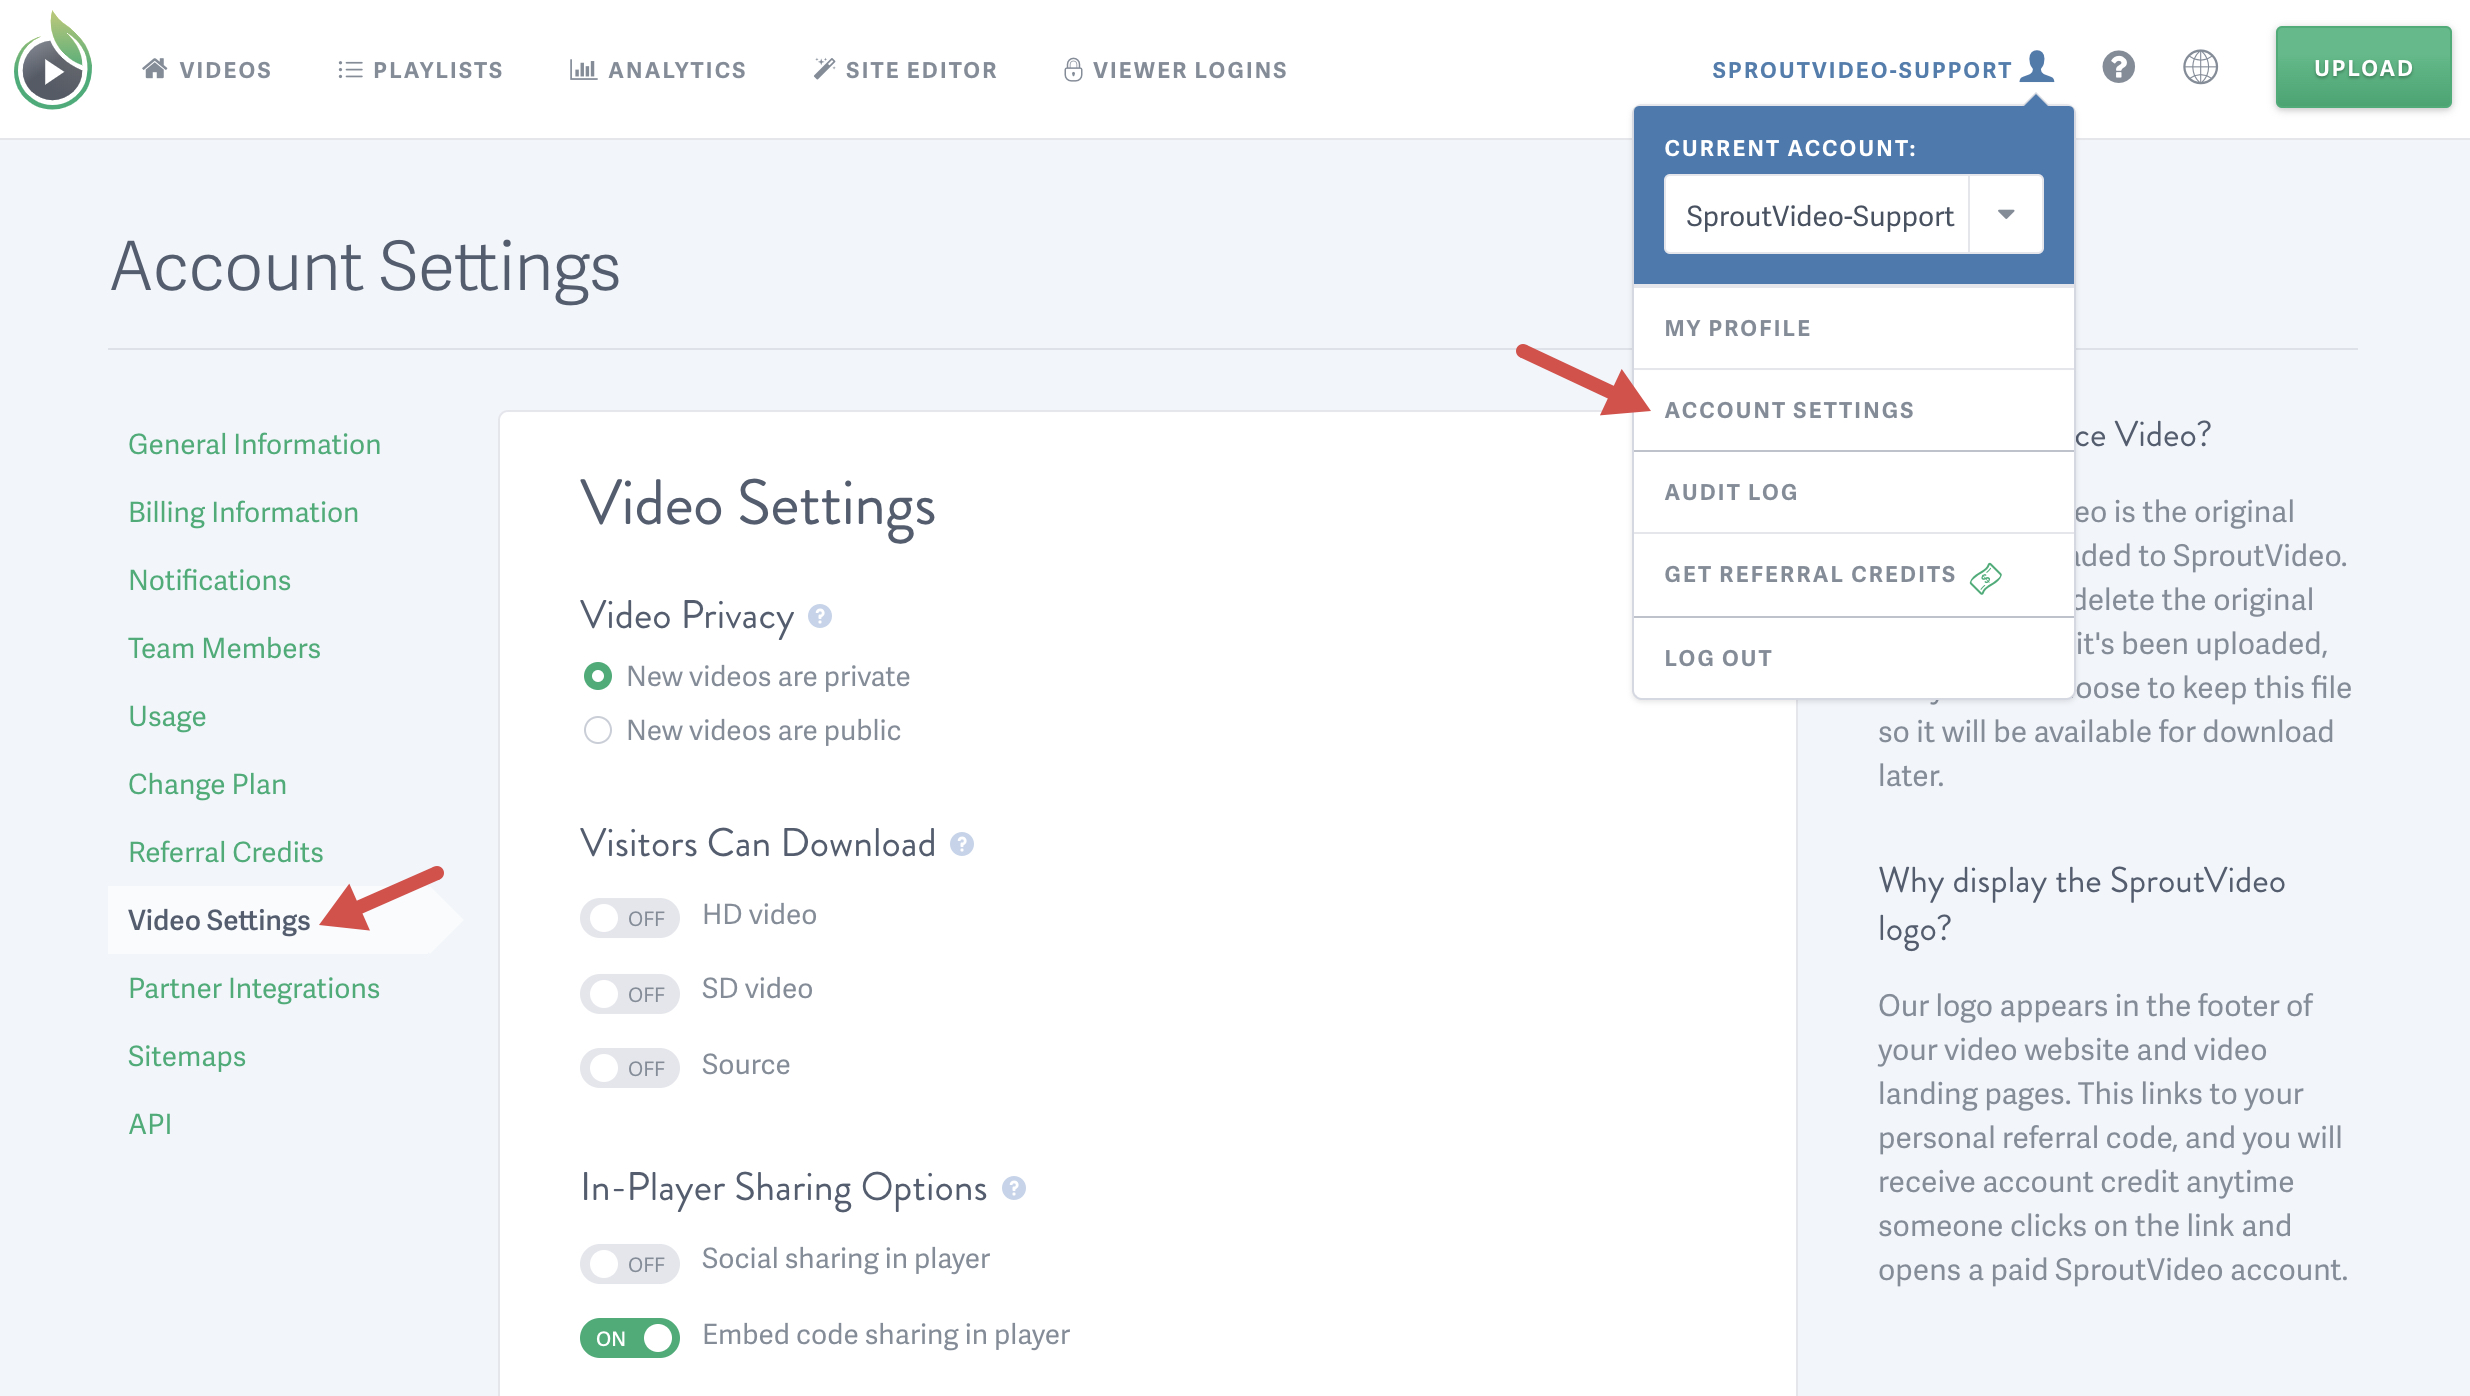 Manage your Video Settings for videos hosted on SproutVideo